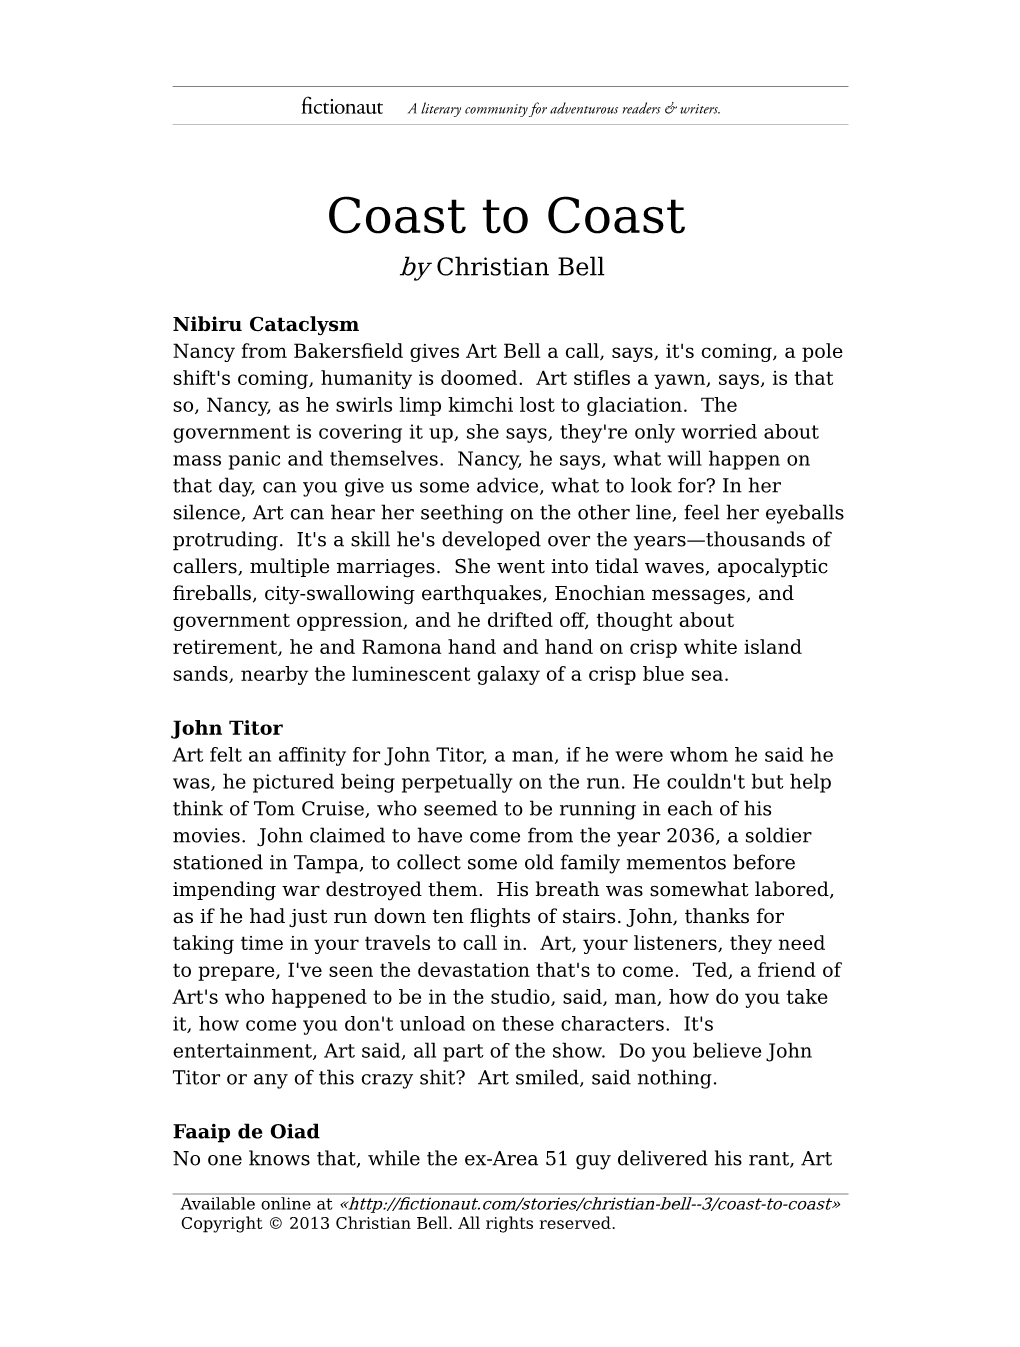 Coast to Coast by Christian Bell